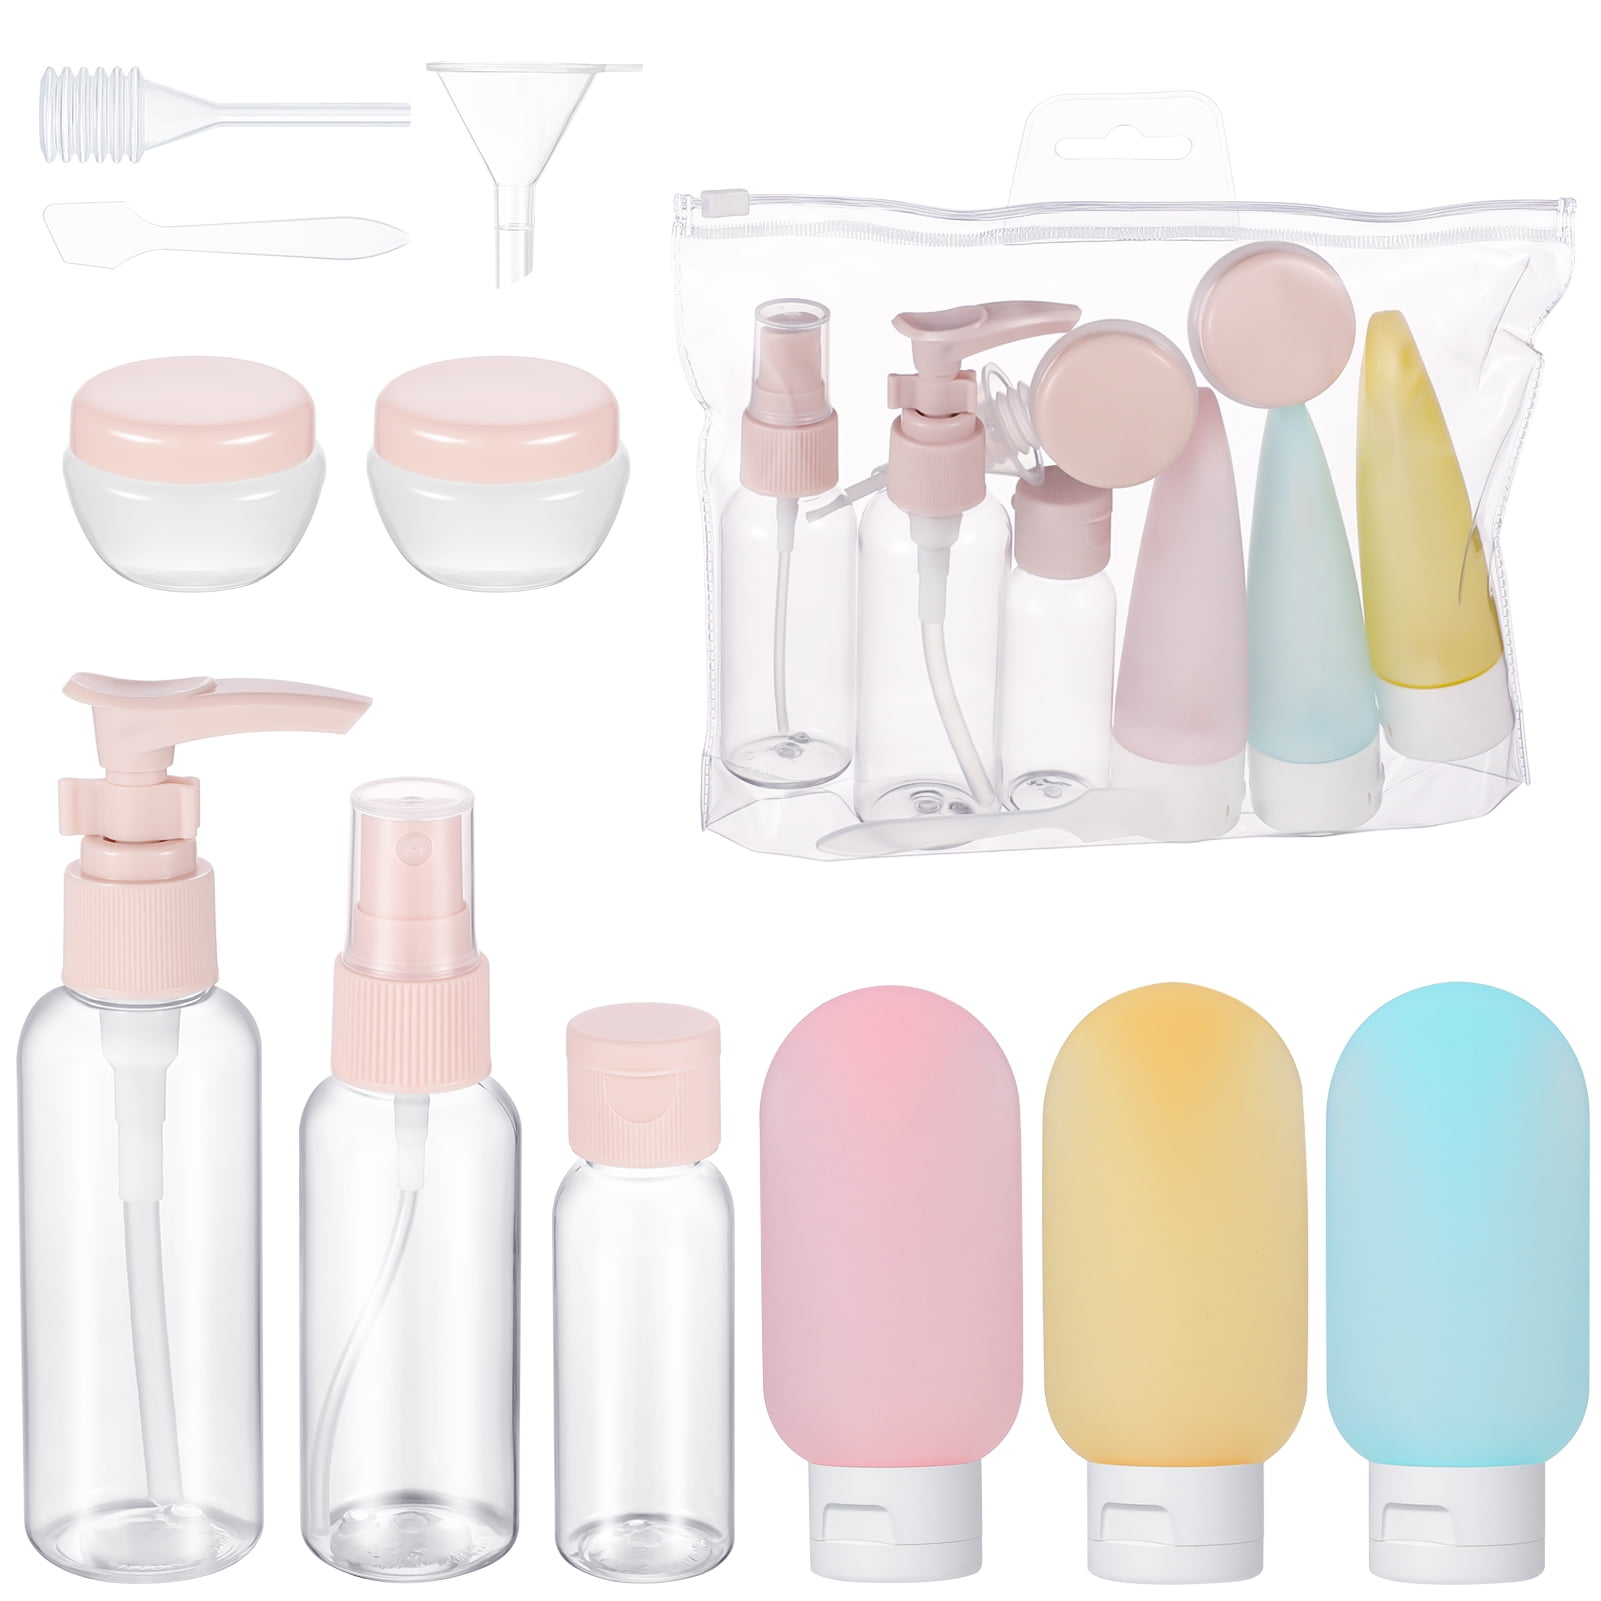 Uairemisc 6pc Travel Bottle Containers, 3oz Lotion Bottles & Spray Bottles,  Leakproof, TSA Approved Clear Containers